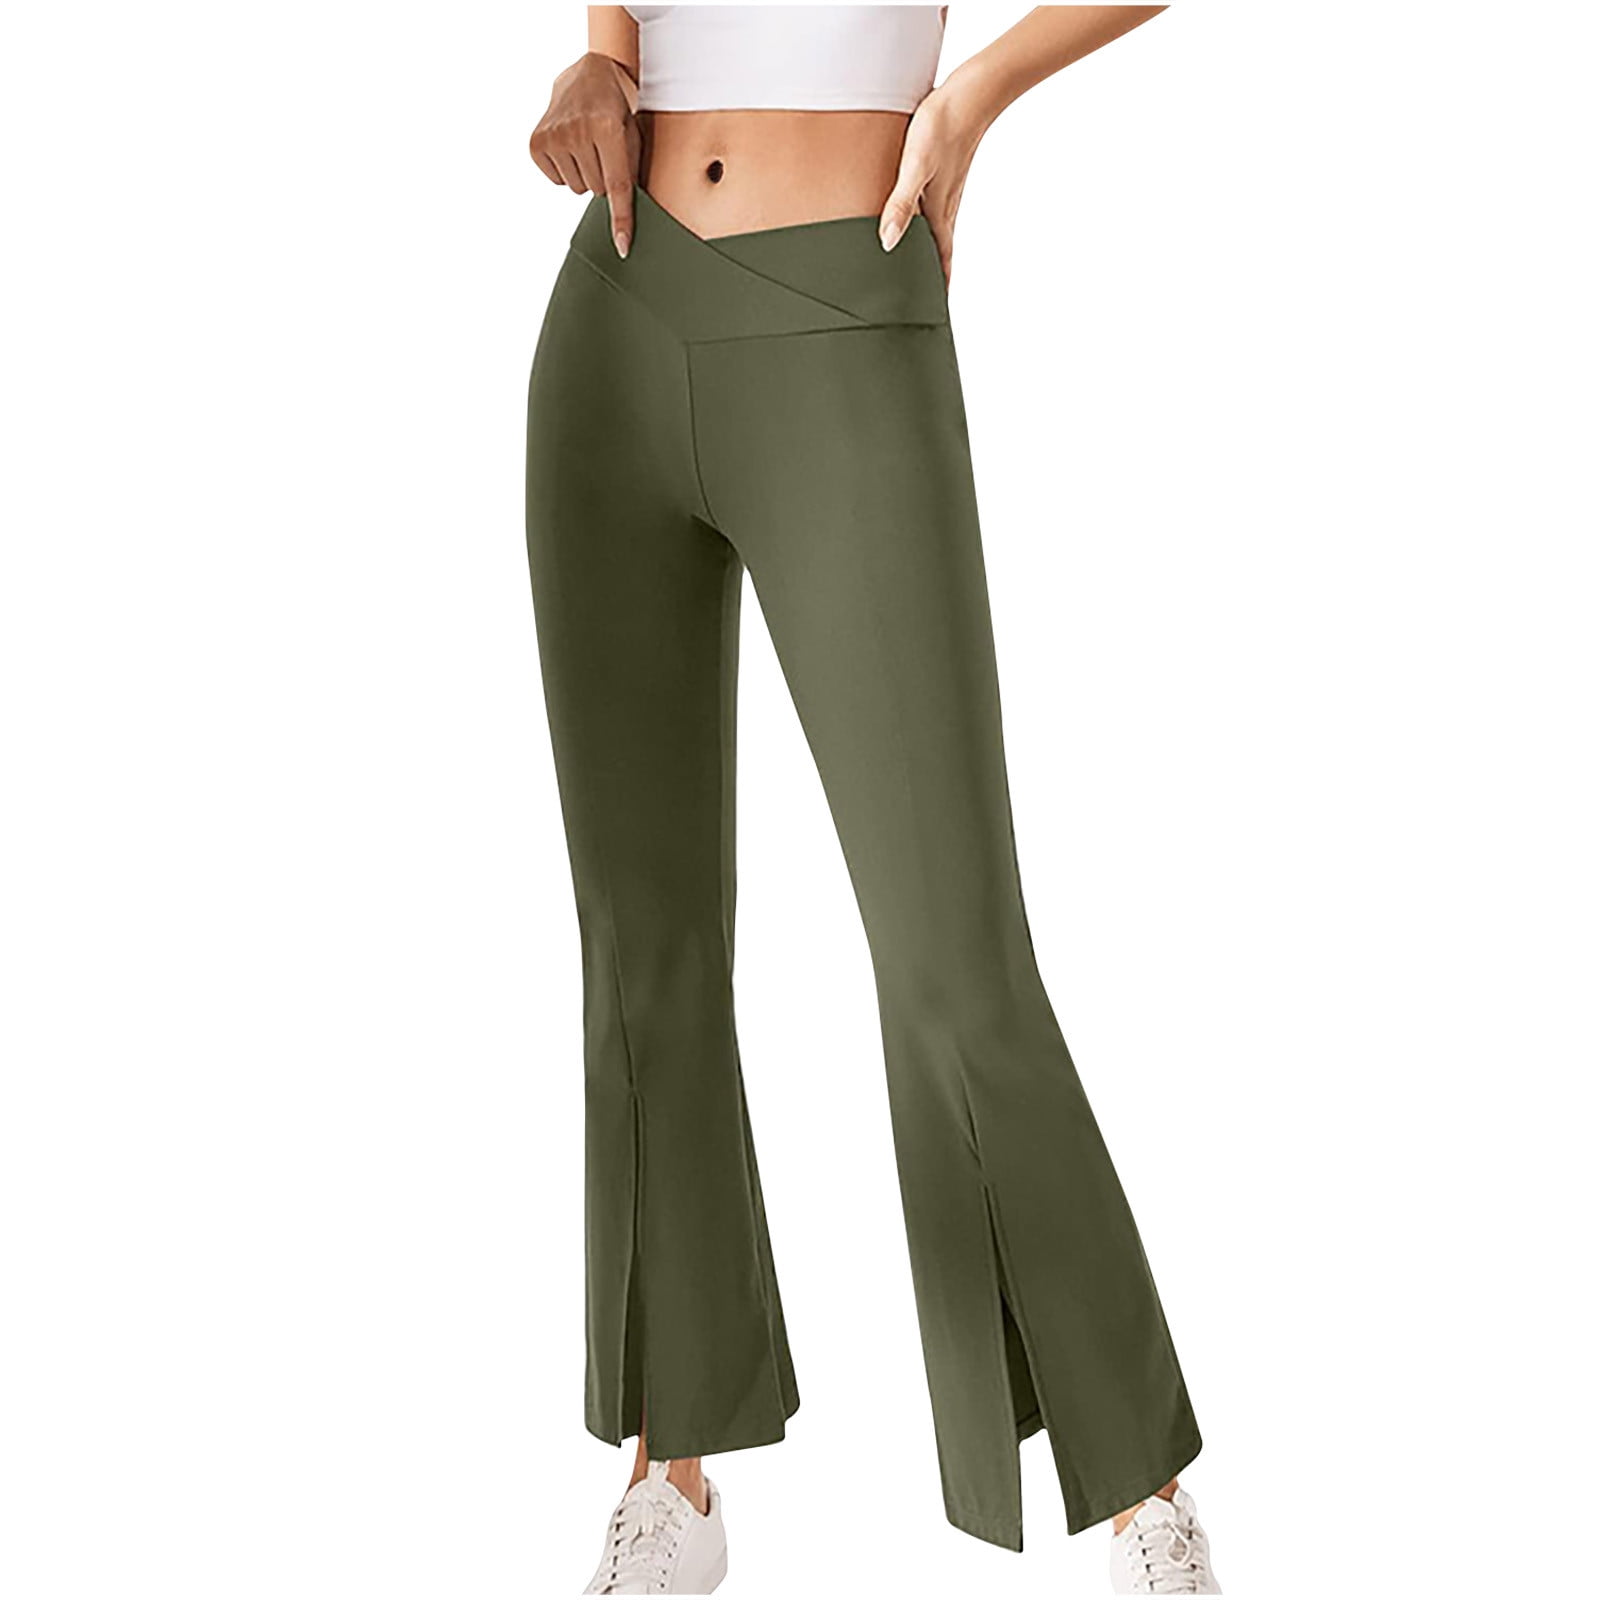  Crop Linen Pants for Women Womens Elastic High Waist Bootcut  Pants Crossover Yoga Pants Tummy Control Work Pants Legging Casual Wide Leg Pants  Womens Camouflage Pants : Clothing, Shoes & Jewelry